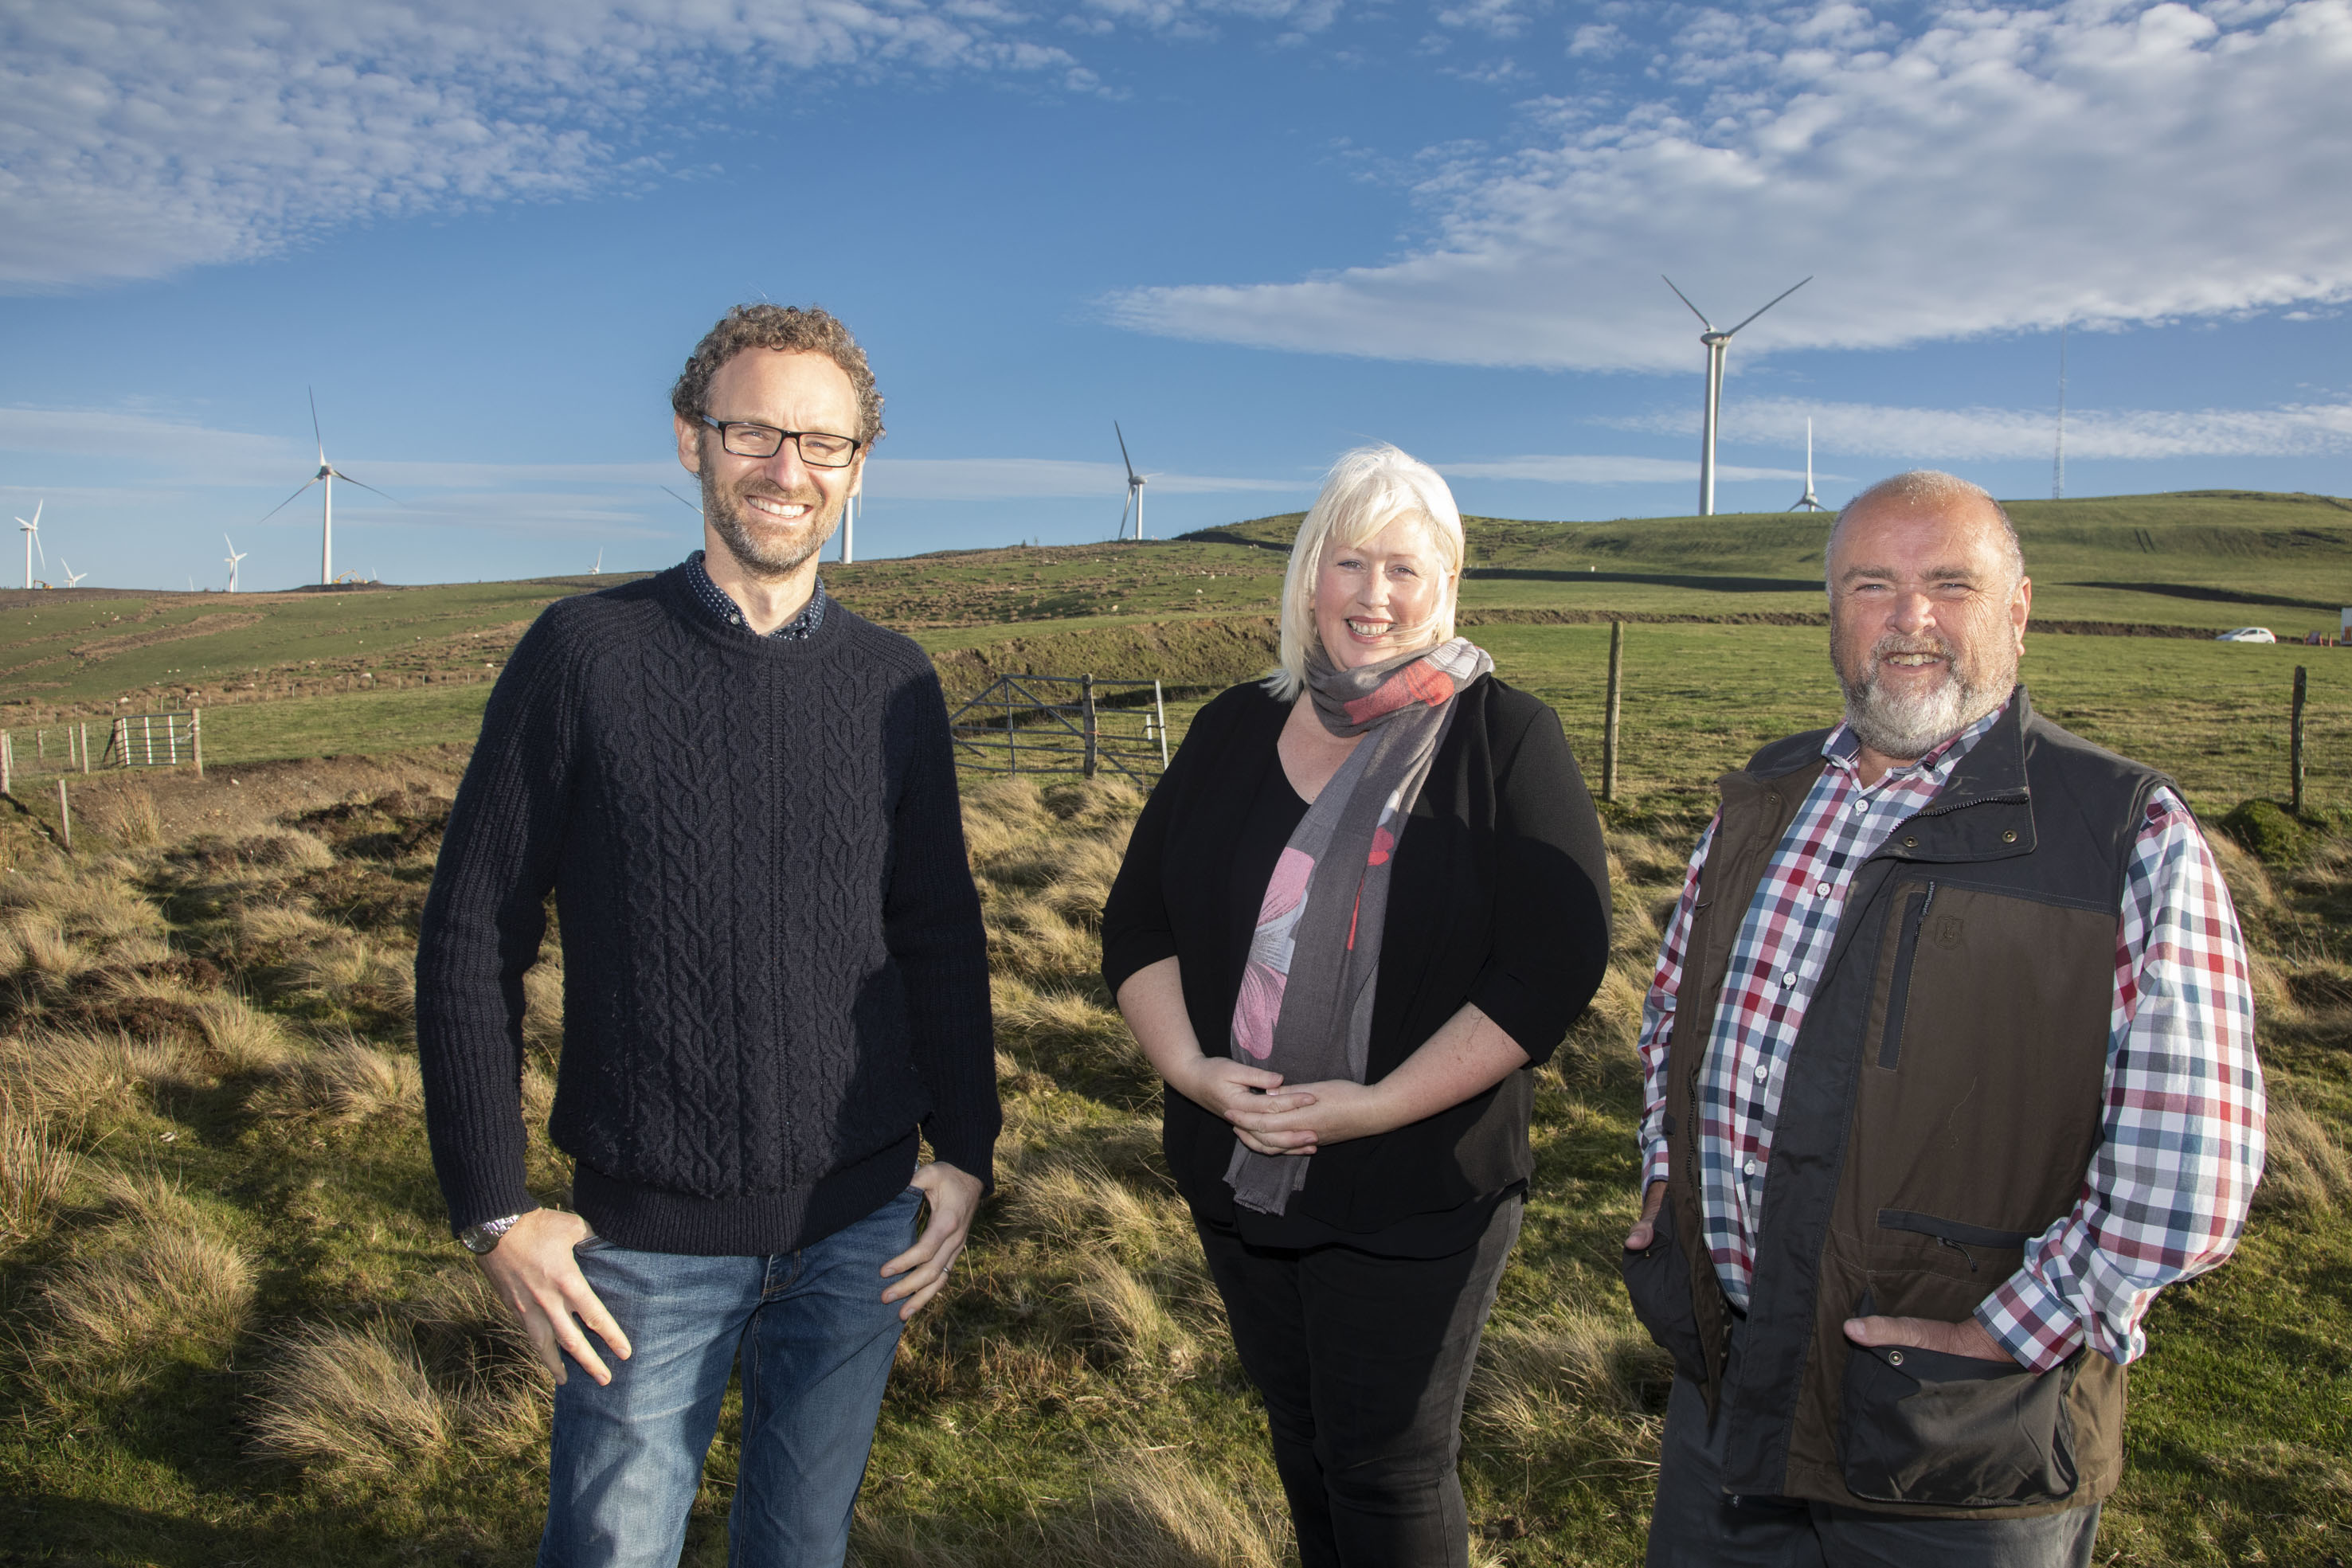 Time to cash in on £4 million windfarm windfall for rural Denbighshire